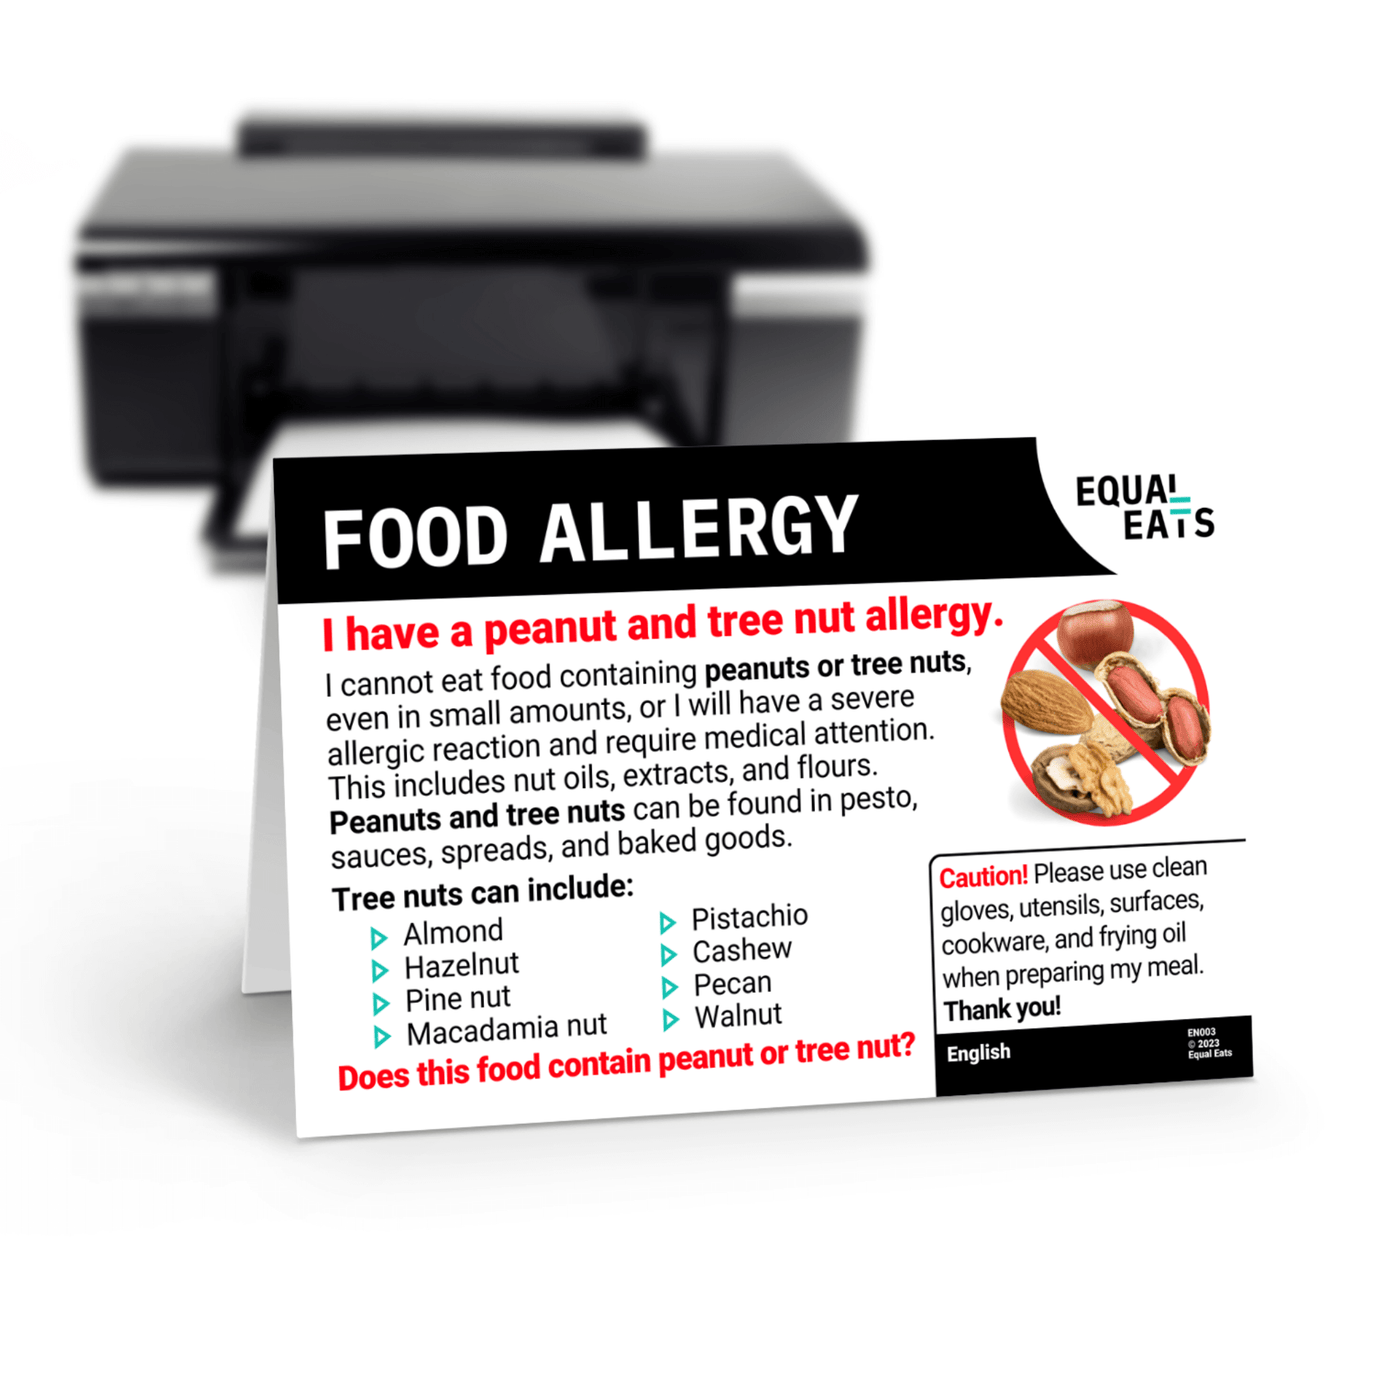 Printable Peanut and Tree Nut Allergy Card in Portuguese